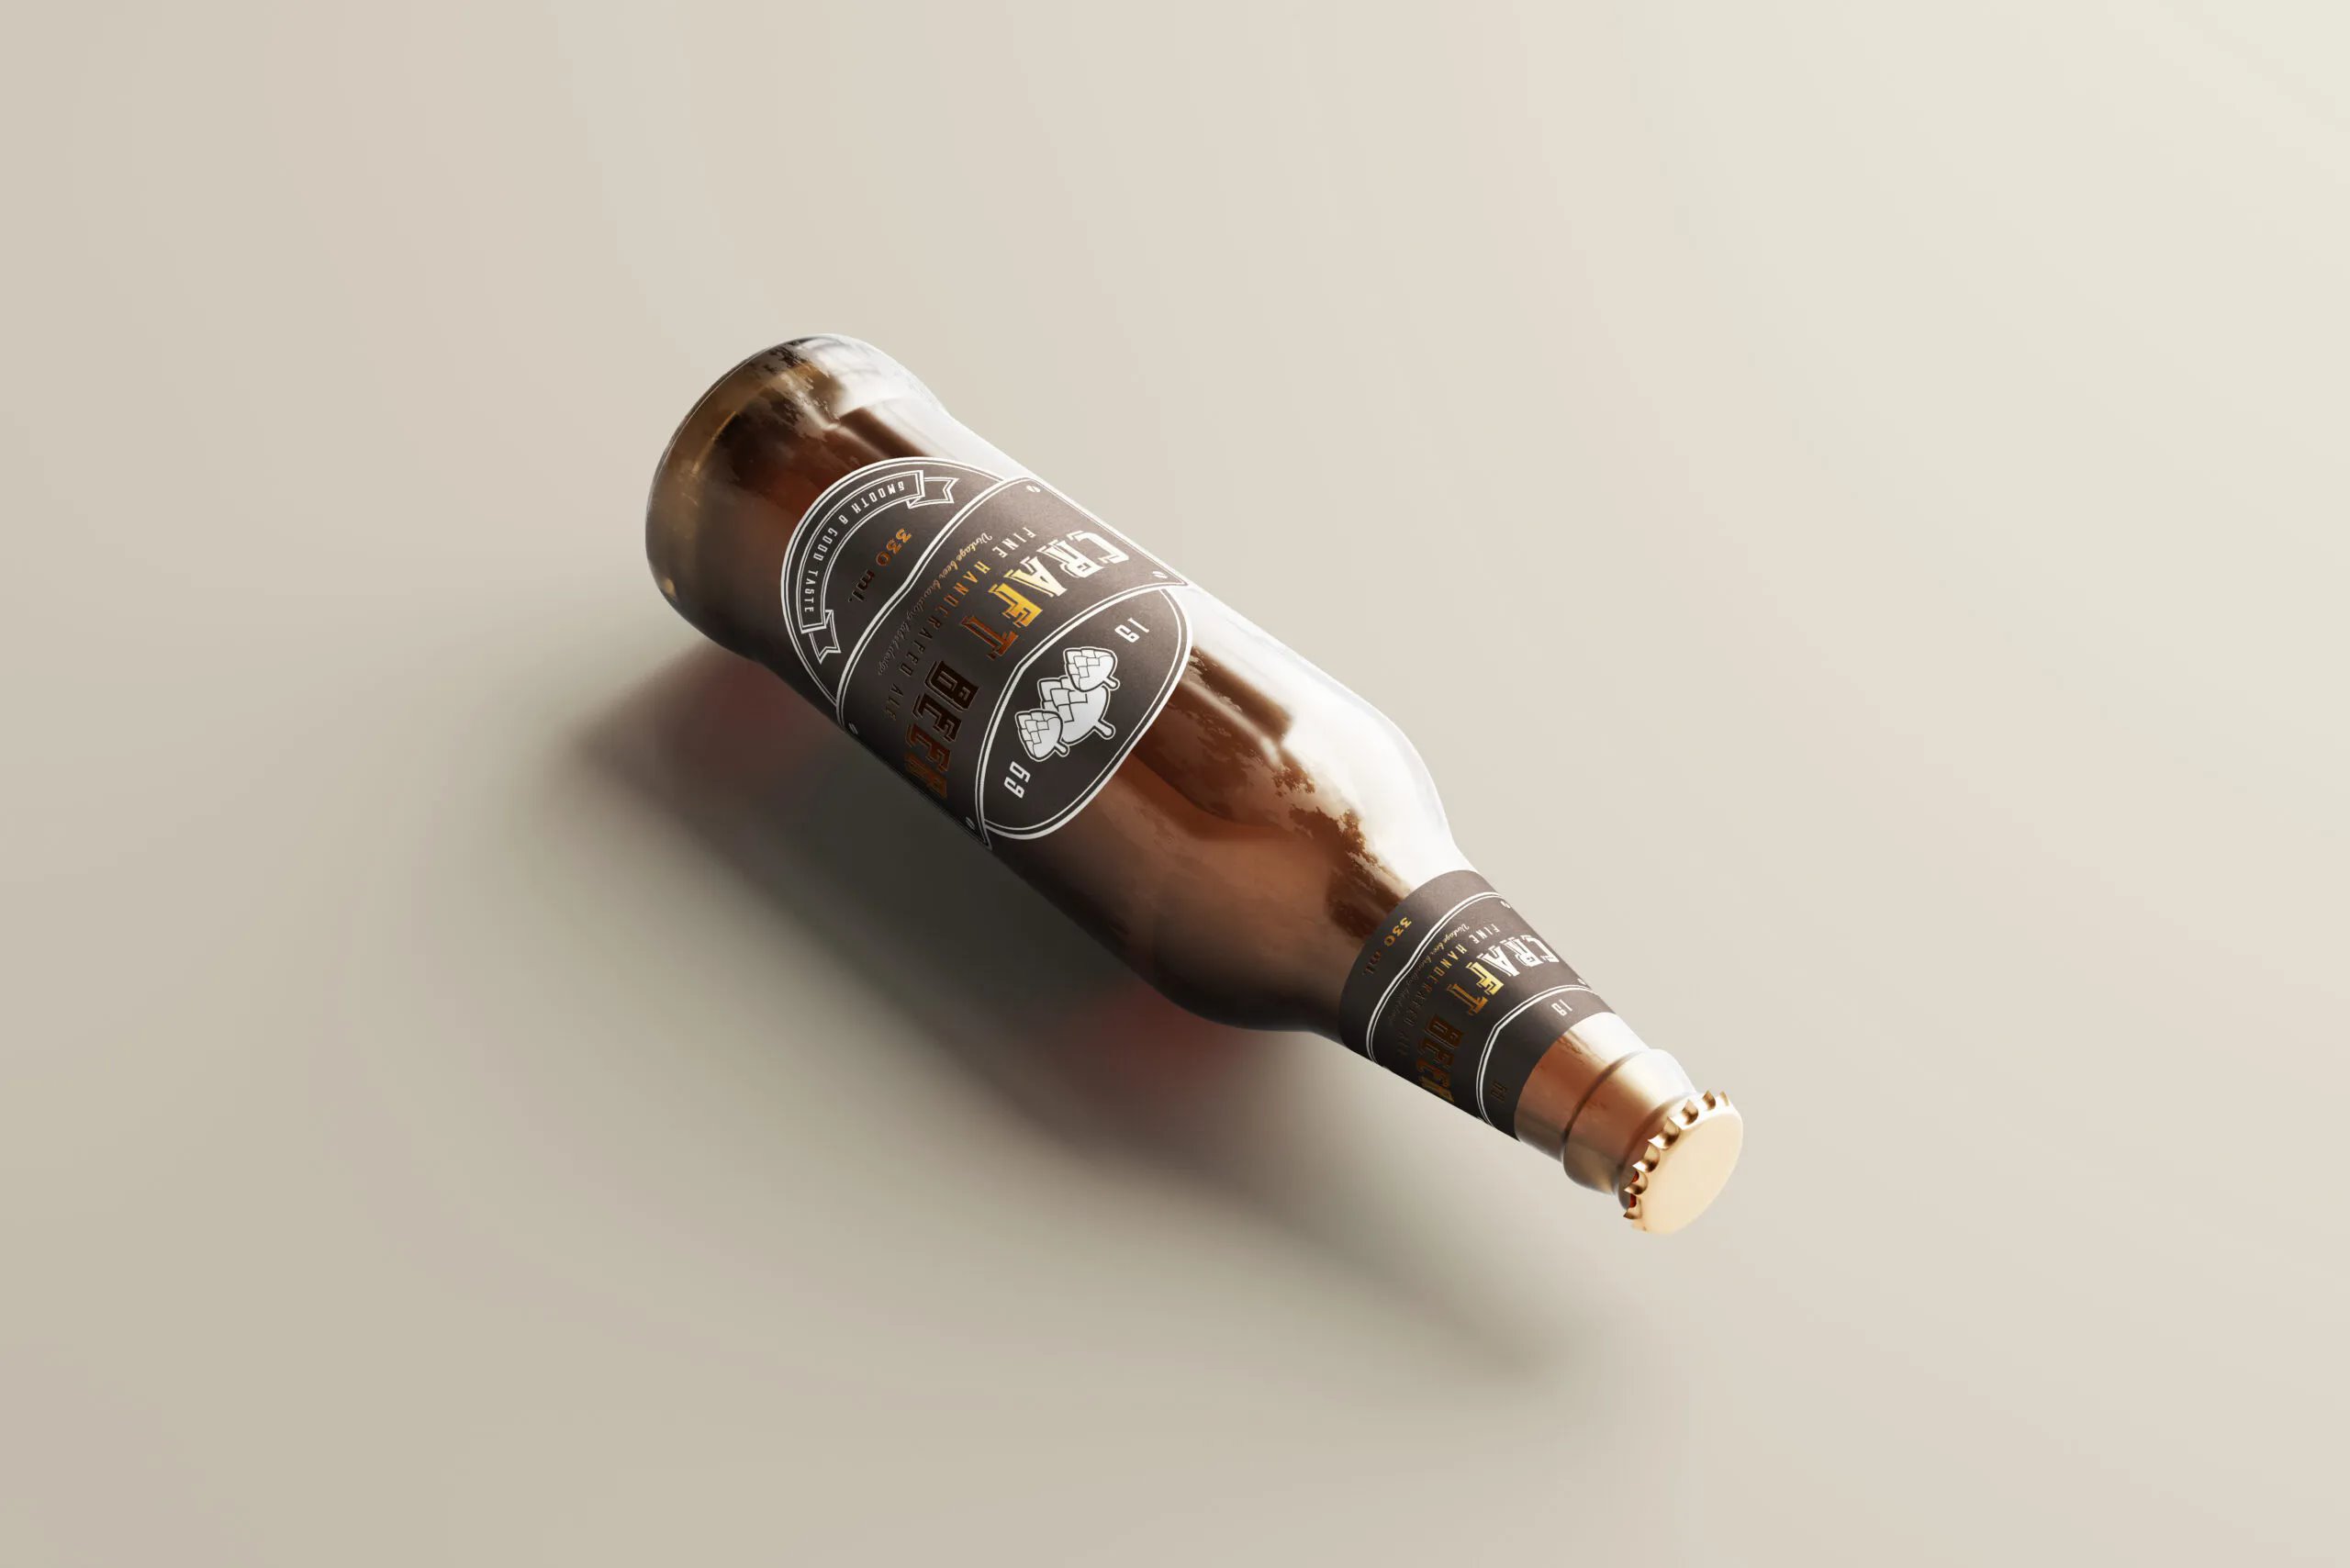 5 Mockups of Beer Bottle in Different Sights FREE PSD